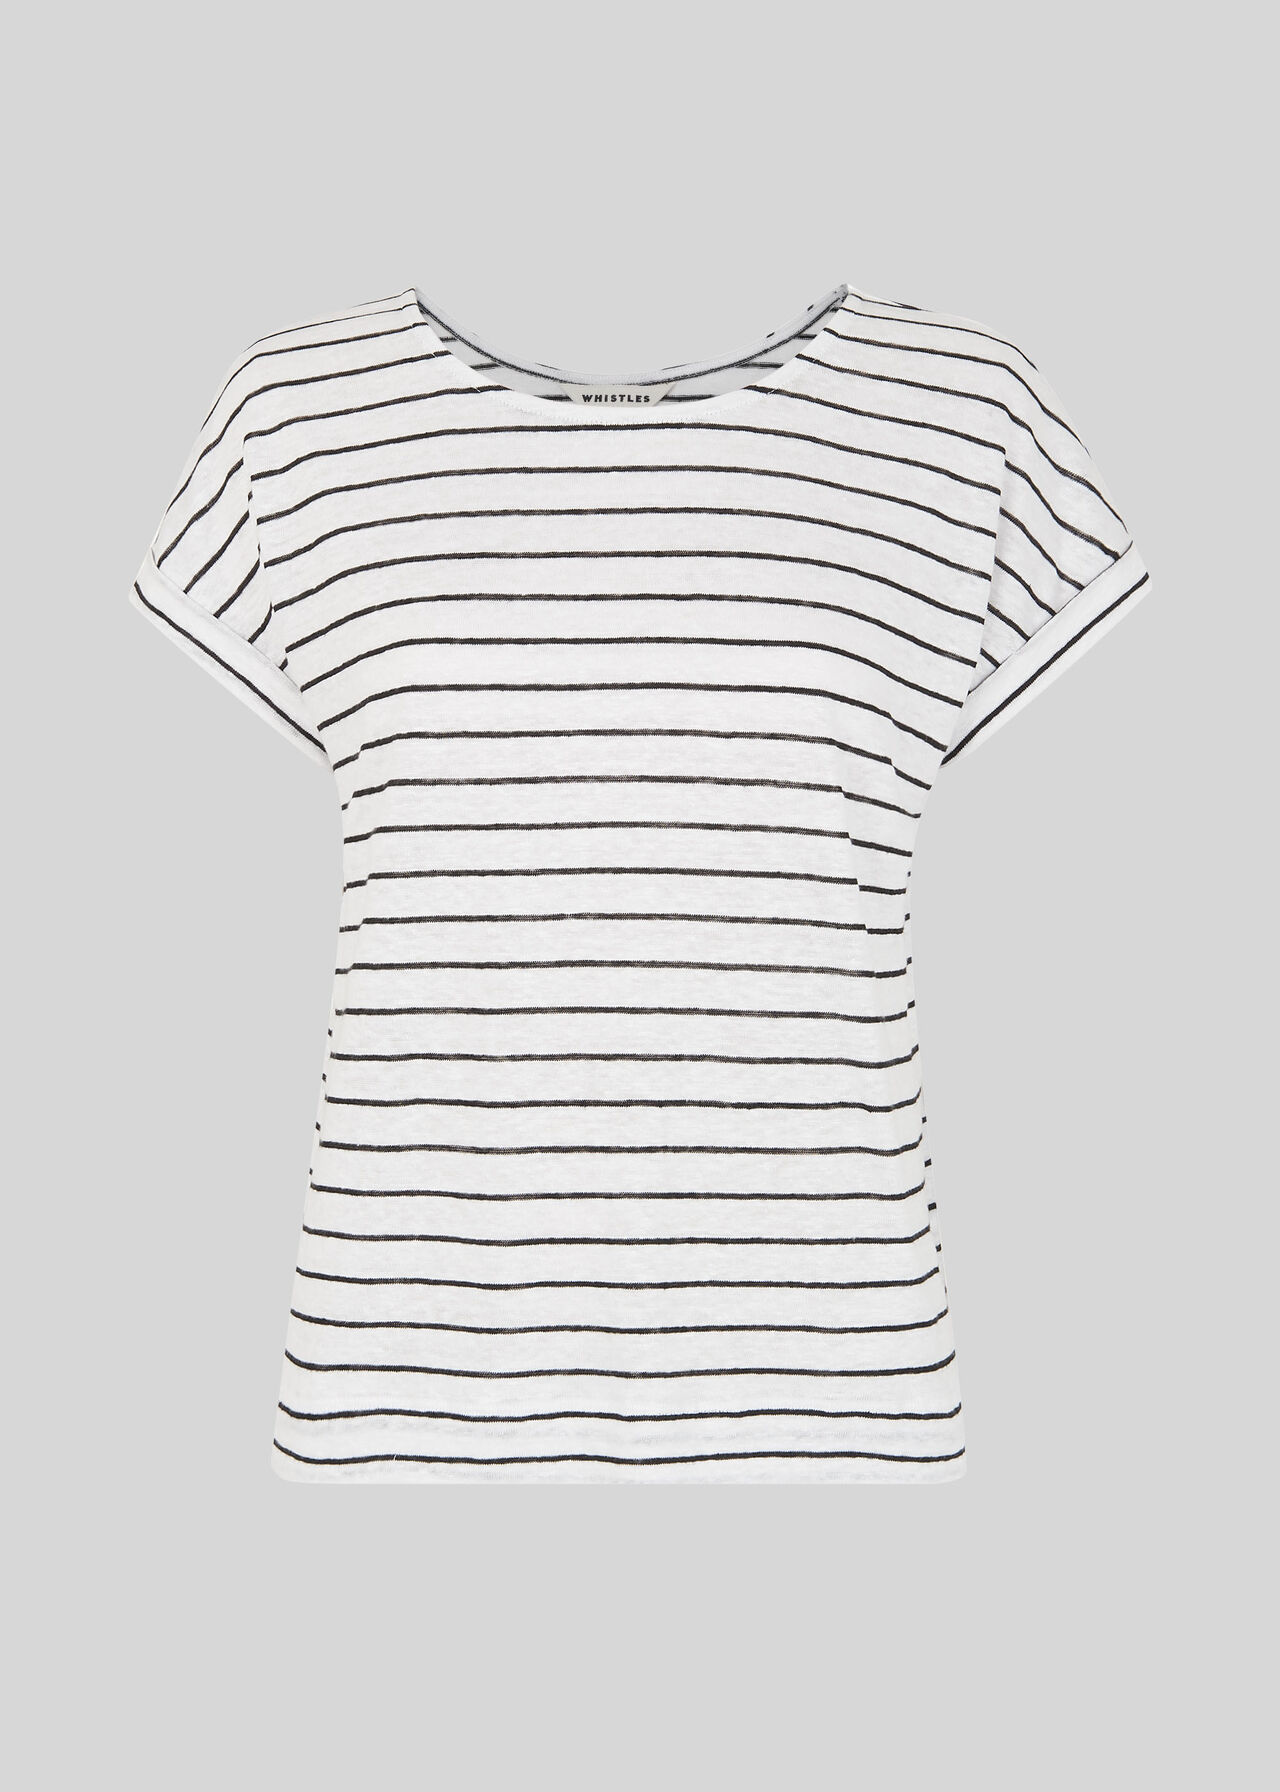 Black And White Stripe Relaxed Linen Tee | WHISTLES